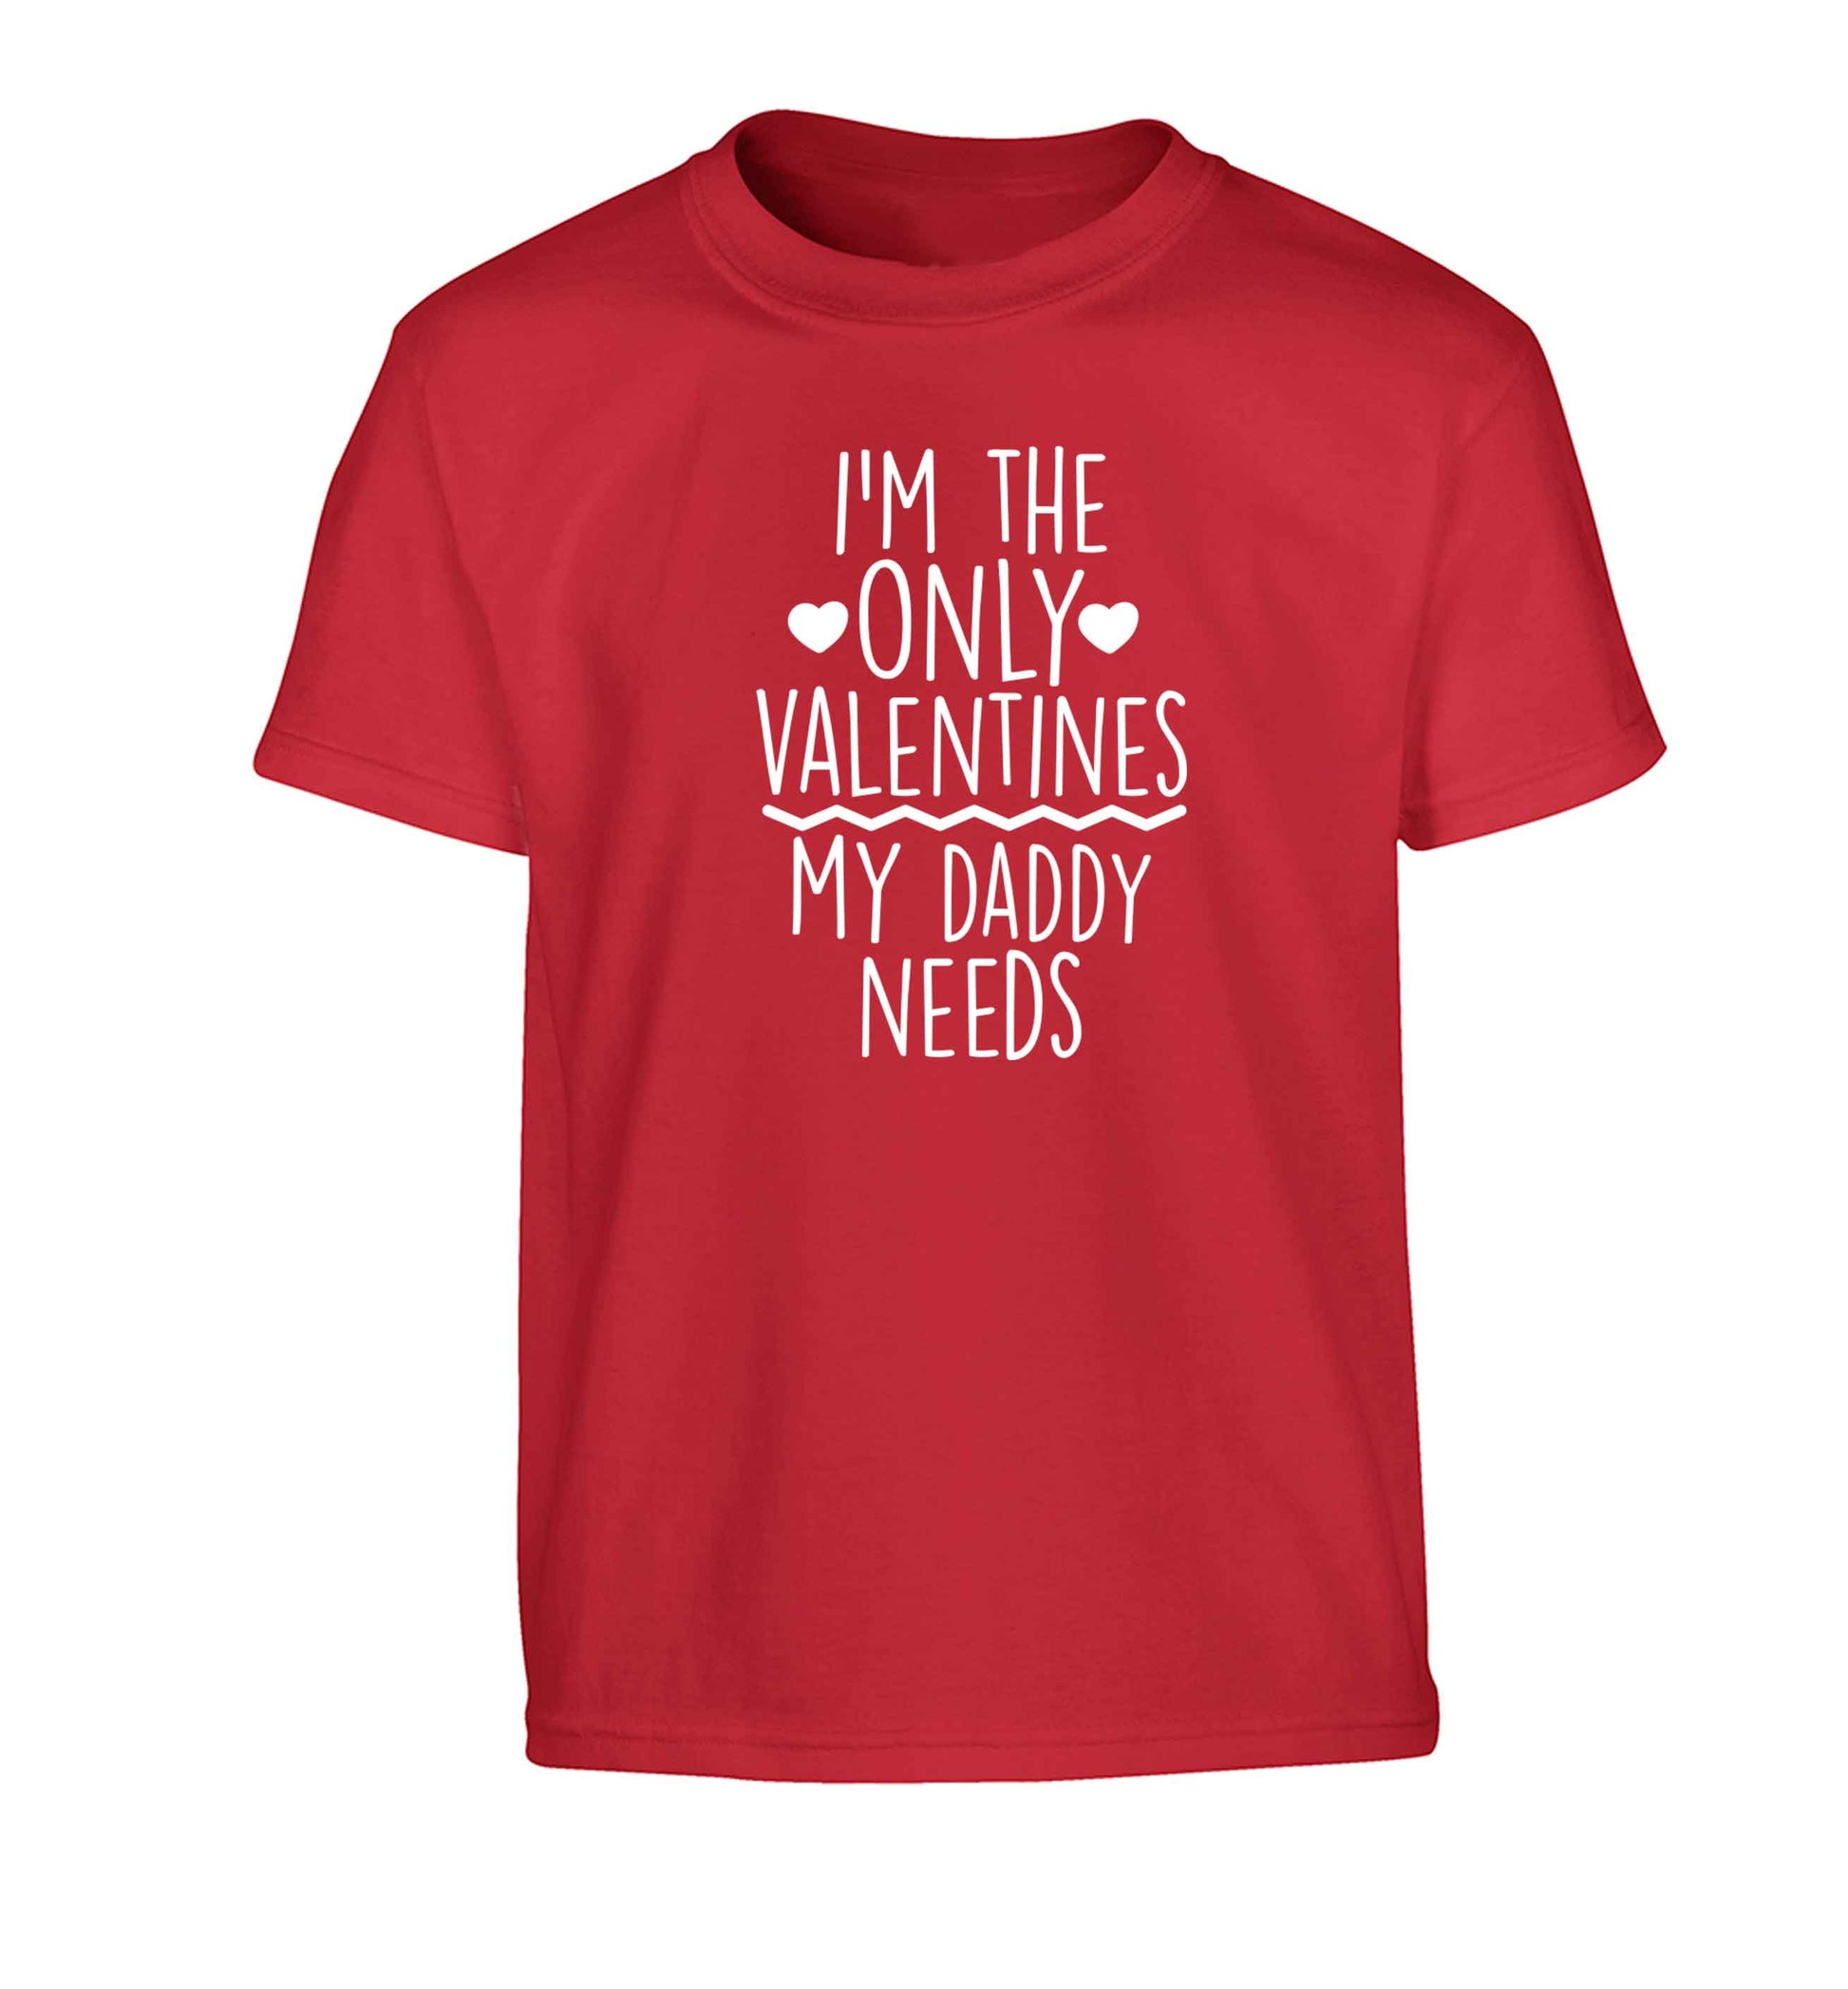 I'm the only valentines my daddy needs Children's red Tshirt 12-13 Years